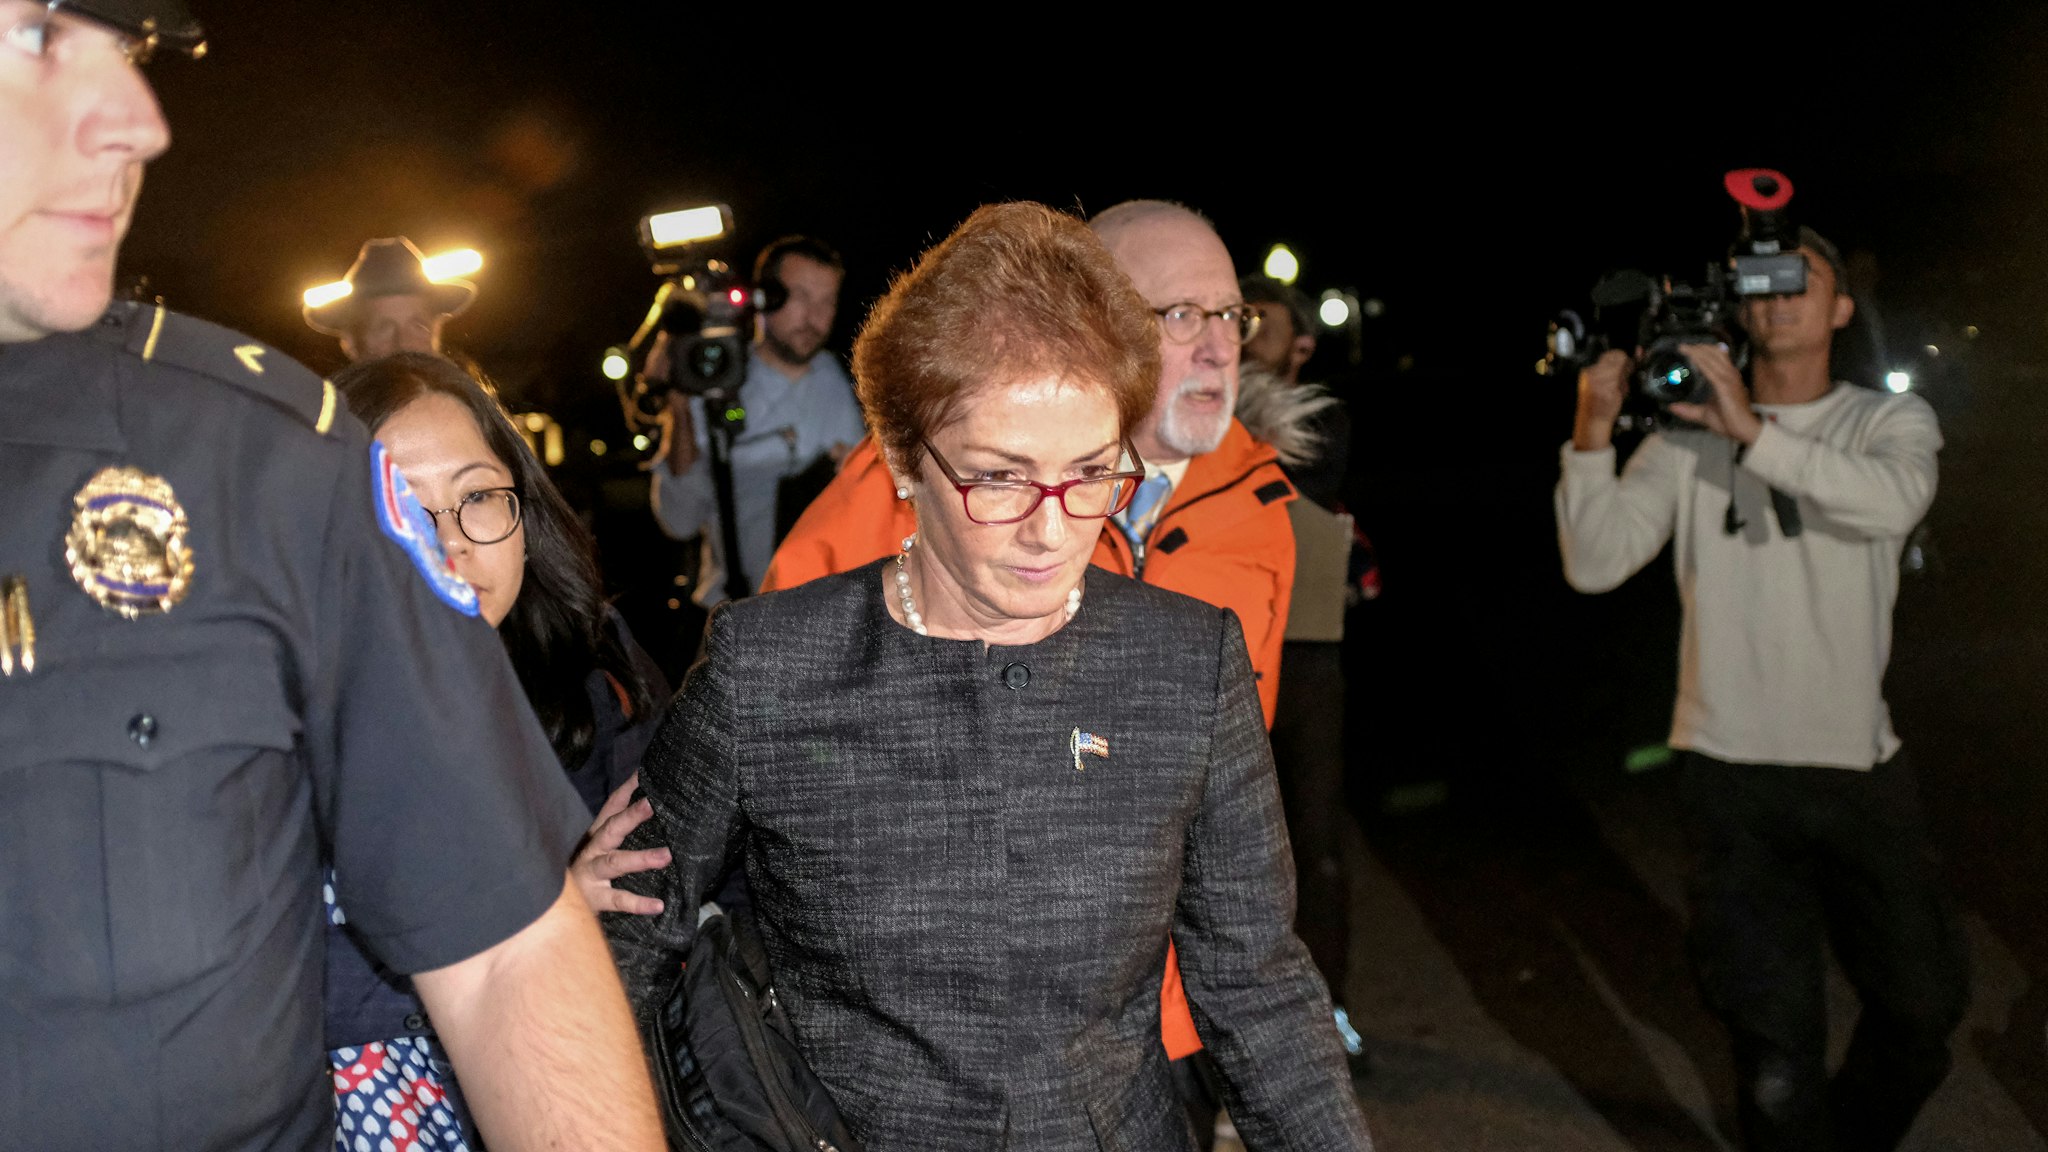 Marie Yovanovitch, former U.S. Ambassador to Ukraine, center, leaves Capitol Hill after a closed-door deposition before House committees in Washington, D.C., U.S., on Friday, Oct. 11, 2019. Yovanovitch told House impeachment investigators Friday she was ousted after a "concerted campaign" by President Donald Trump and his allies, including Rudy Giuliani.